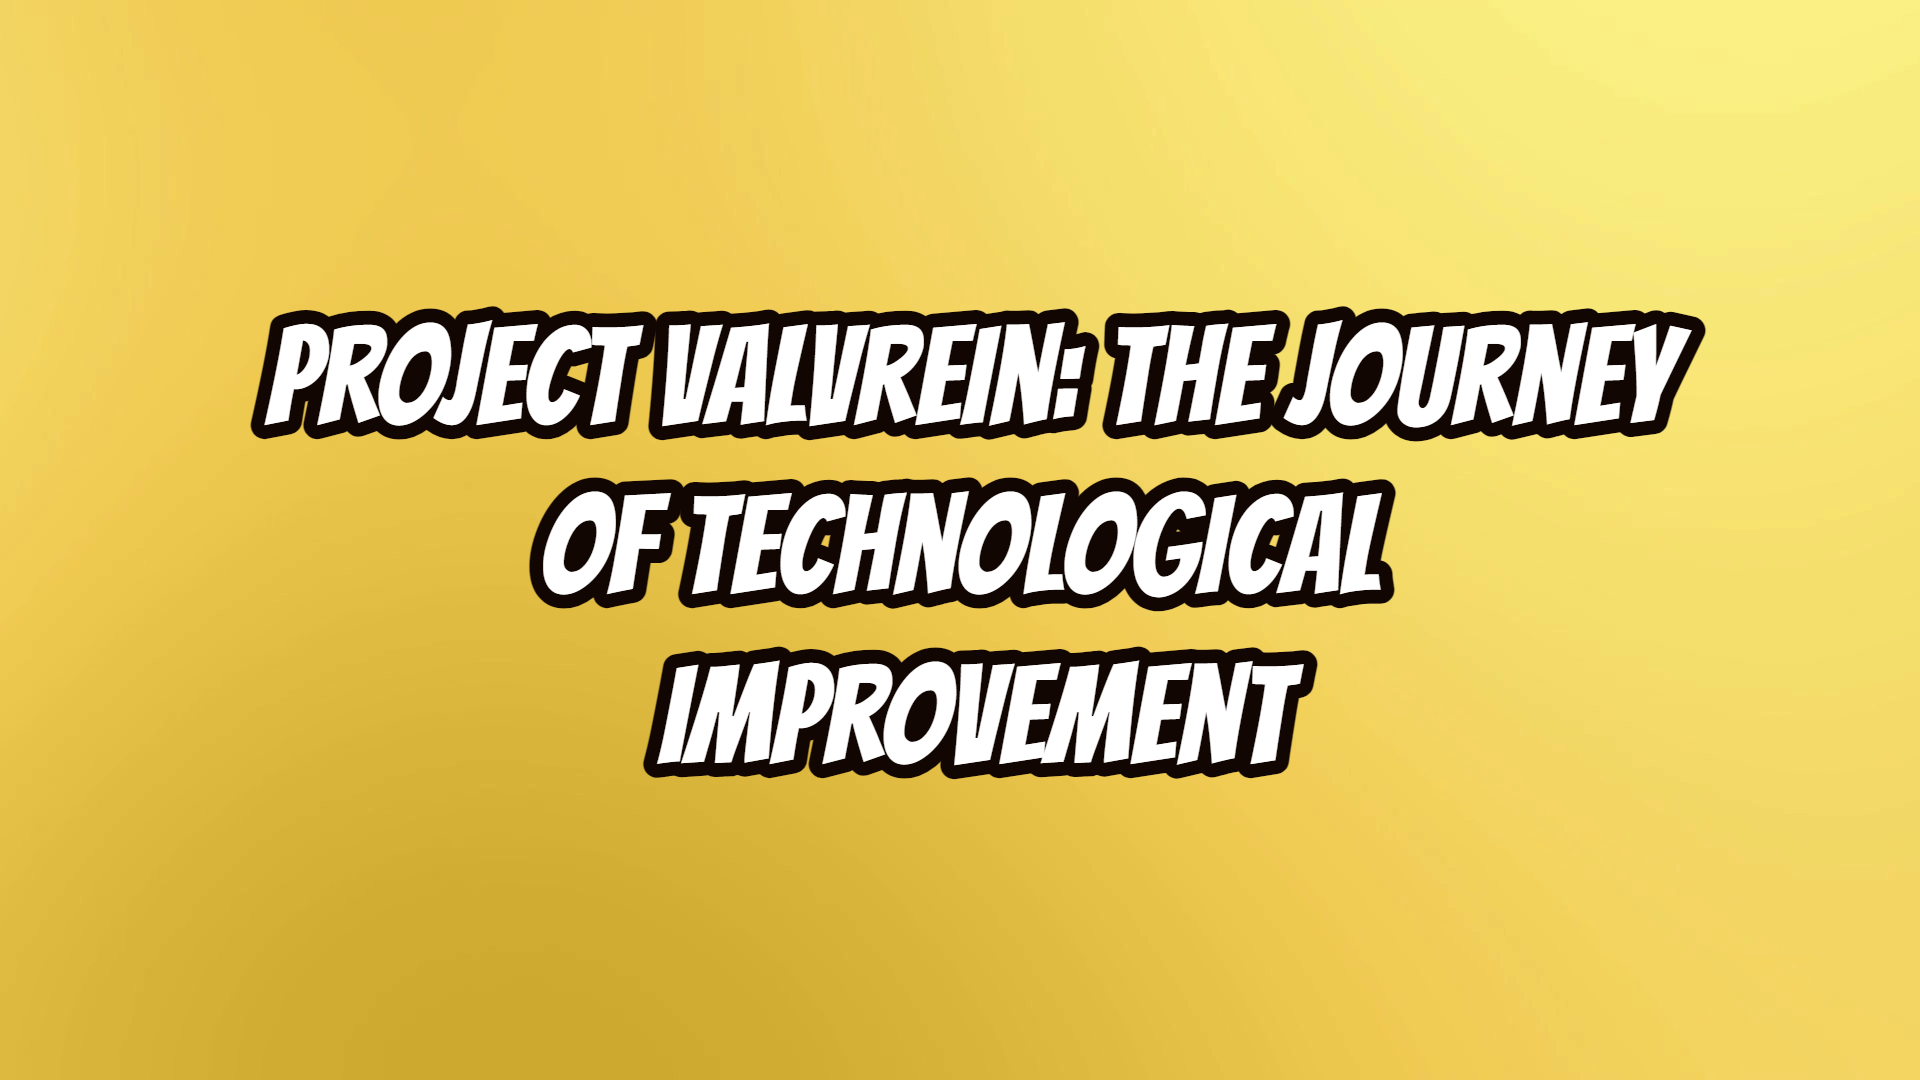 project valvrein: The journey of technological improvement